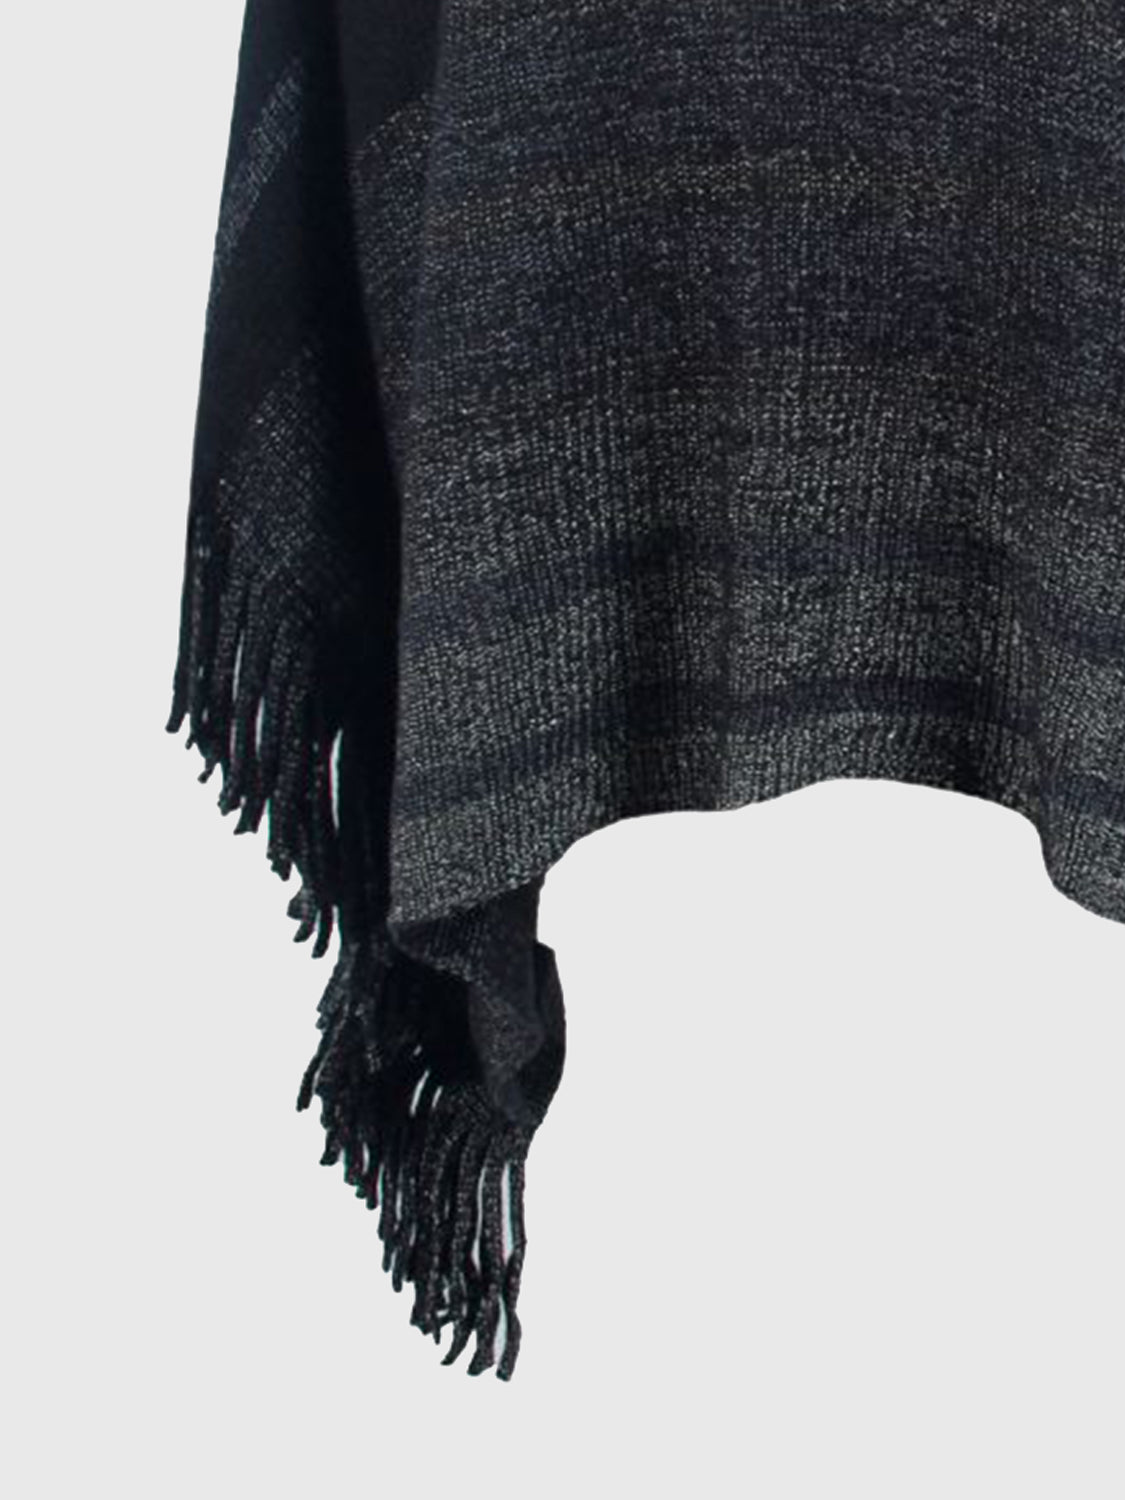 Women’s Striped Boat Neck Poncho with Fringes